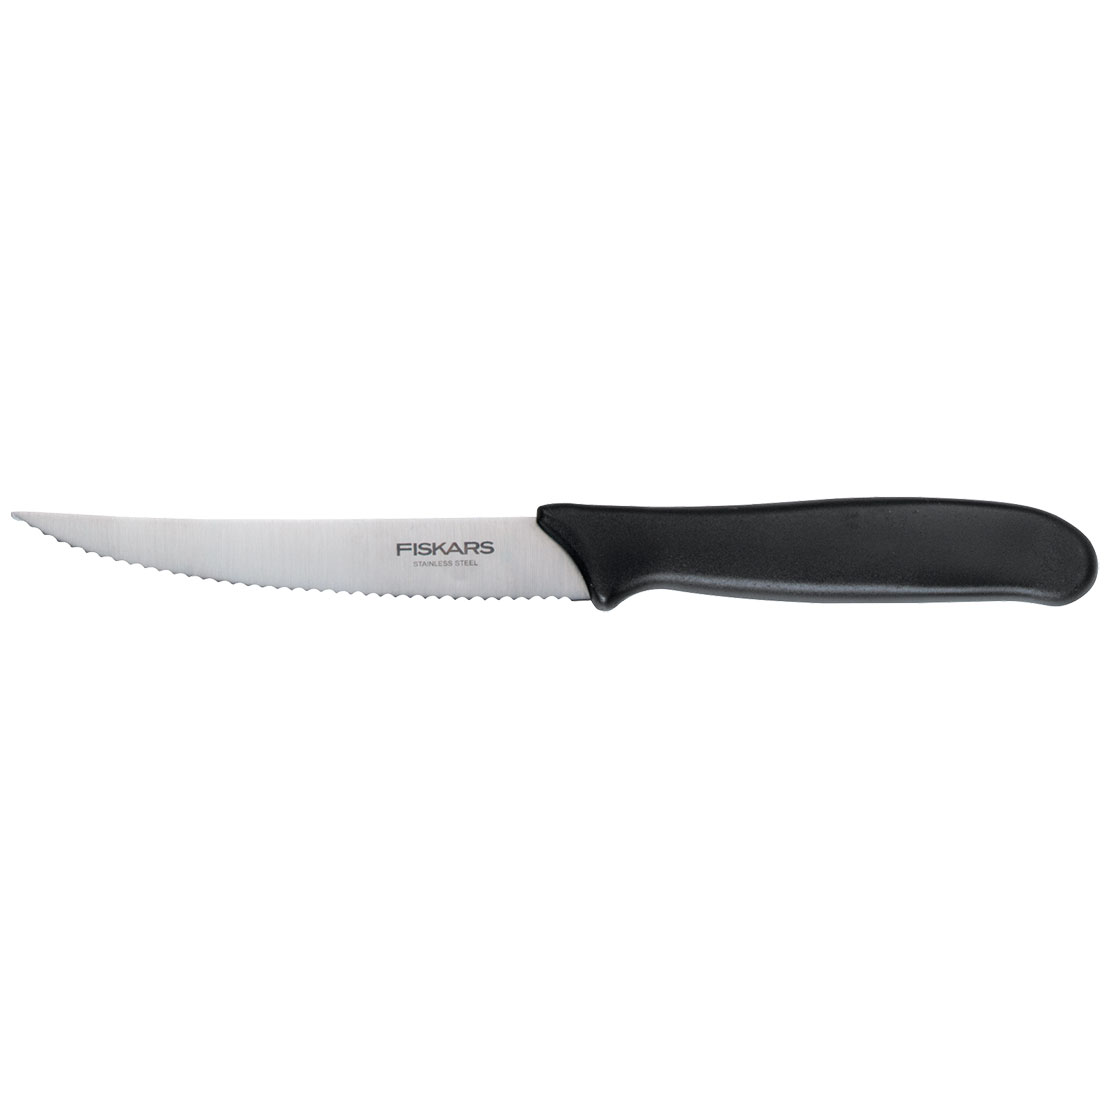 https://www.fiskars.dk/var/fiskars_main/storage/images/frontpage/products/cooking/knives-accessories/tomato-knife-with-serrated-blade-1023816/72687-71-eng-EU/tomato-knife-with-serrated-blade-1023816.jpg